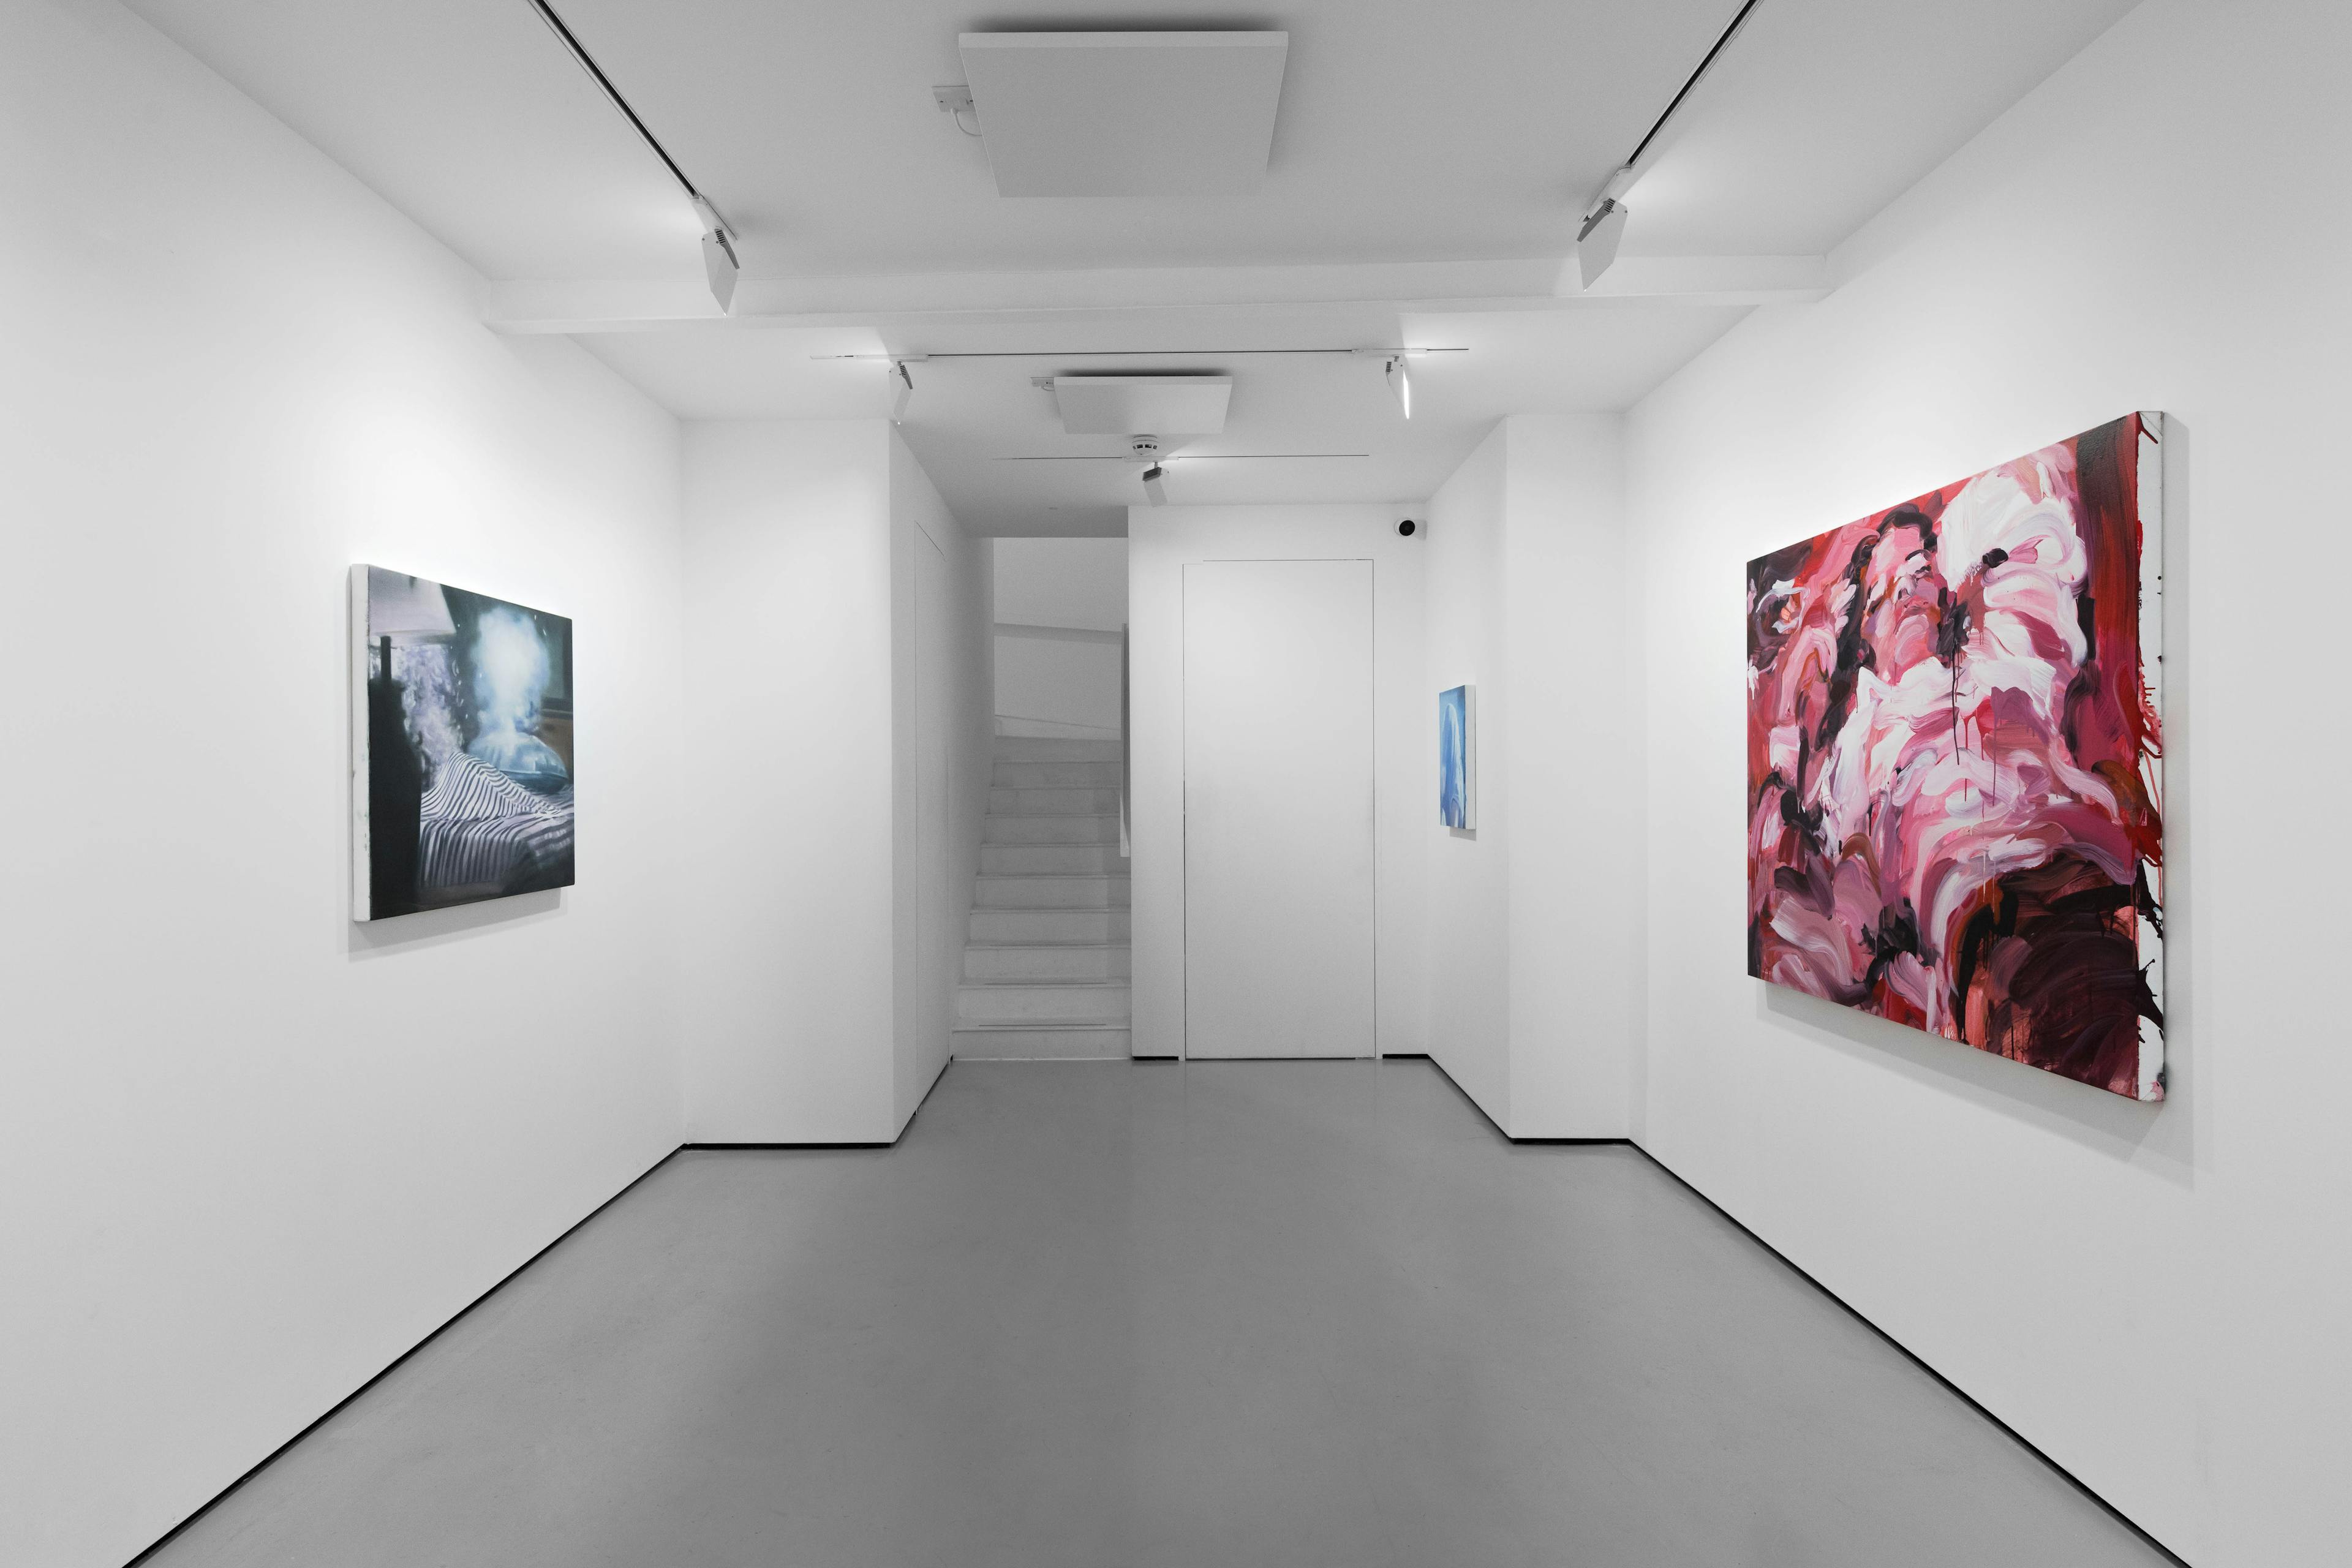 Installation shots of 'Cadence' by Laura Lancaster and Rachel Lancaster at Workplace | London